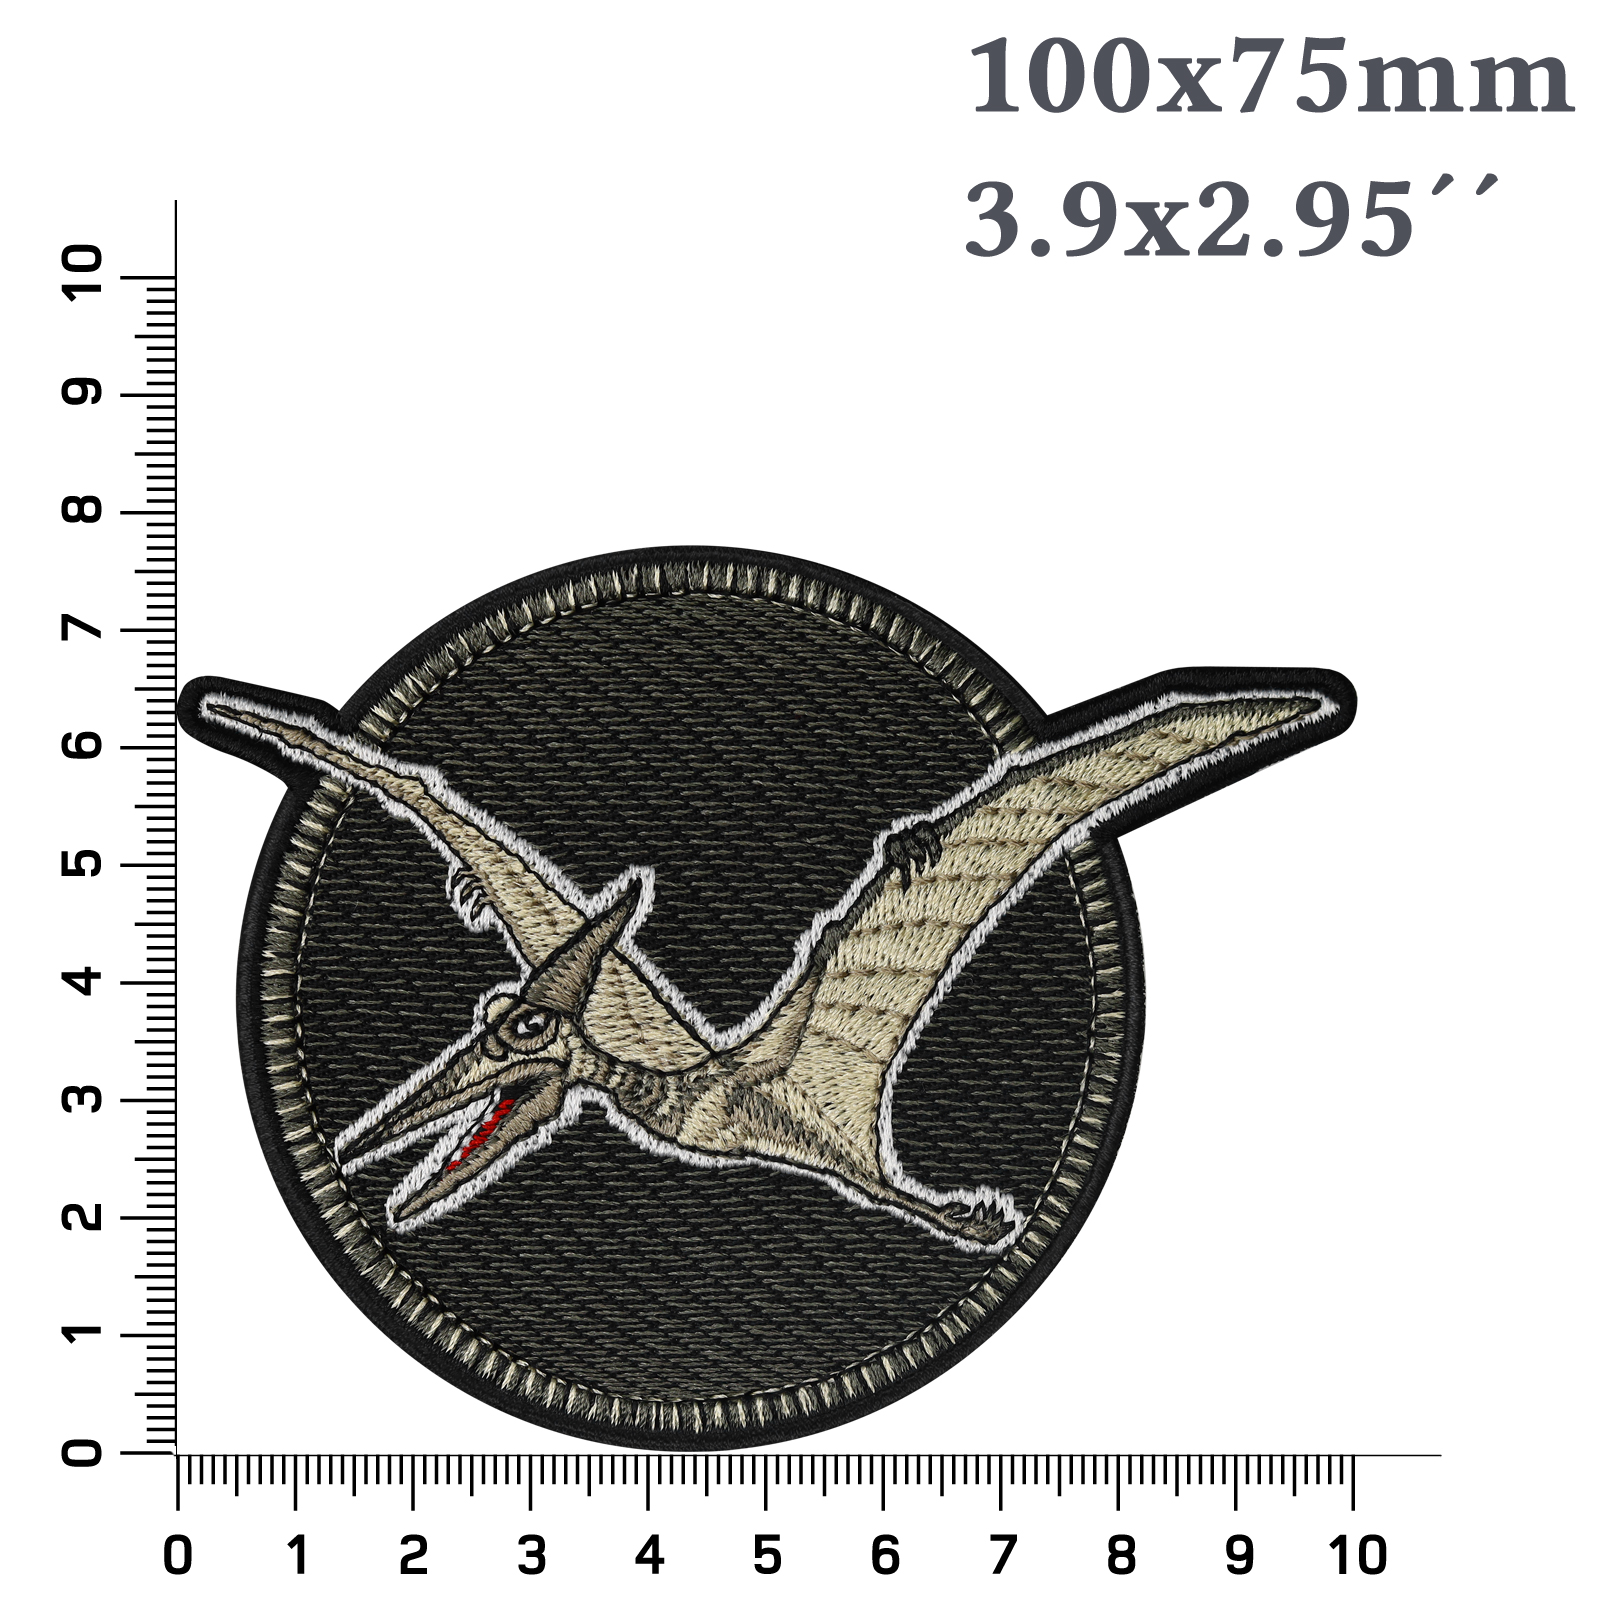 Pteranodon - Patch